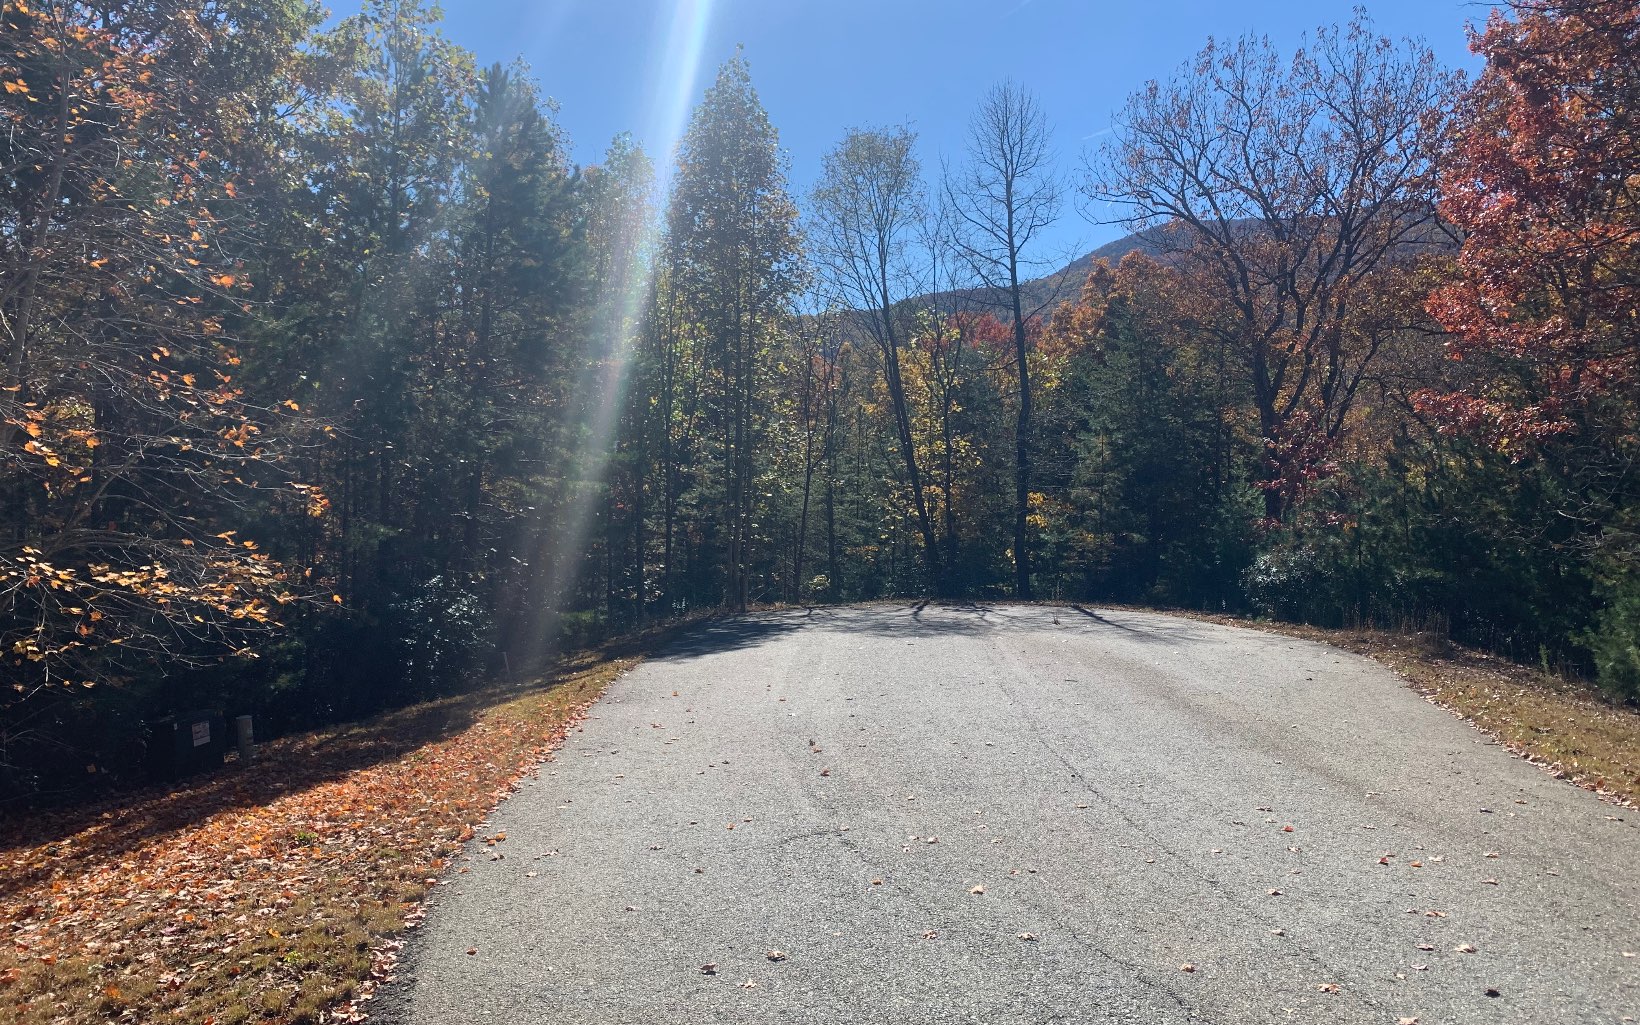 Up close mountain view lot in the beautiful Owltown area of Union County, all paved access, public water, underground power, high-speed fiber optics, come enjoy this upscale mountain community!